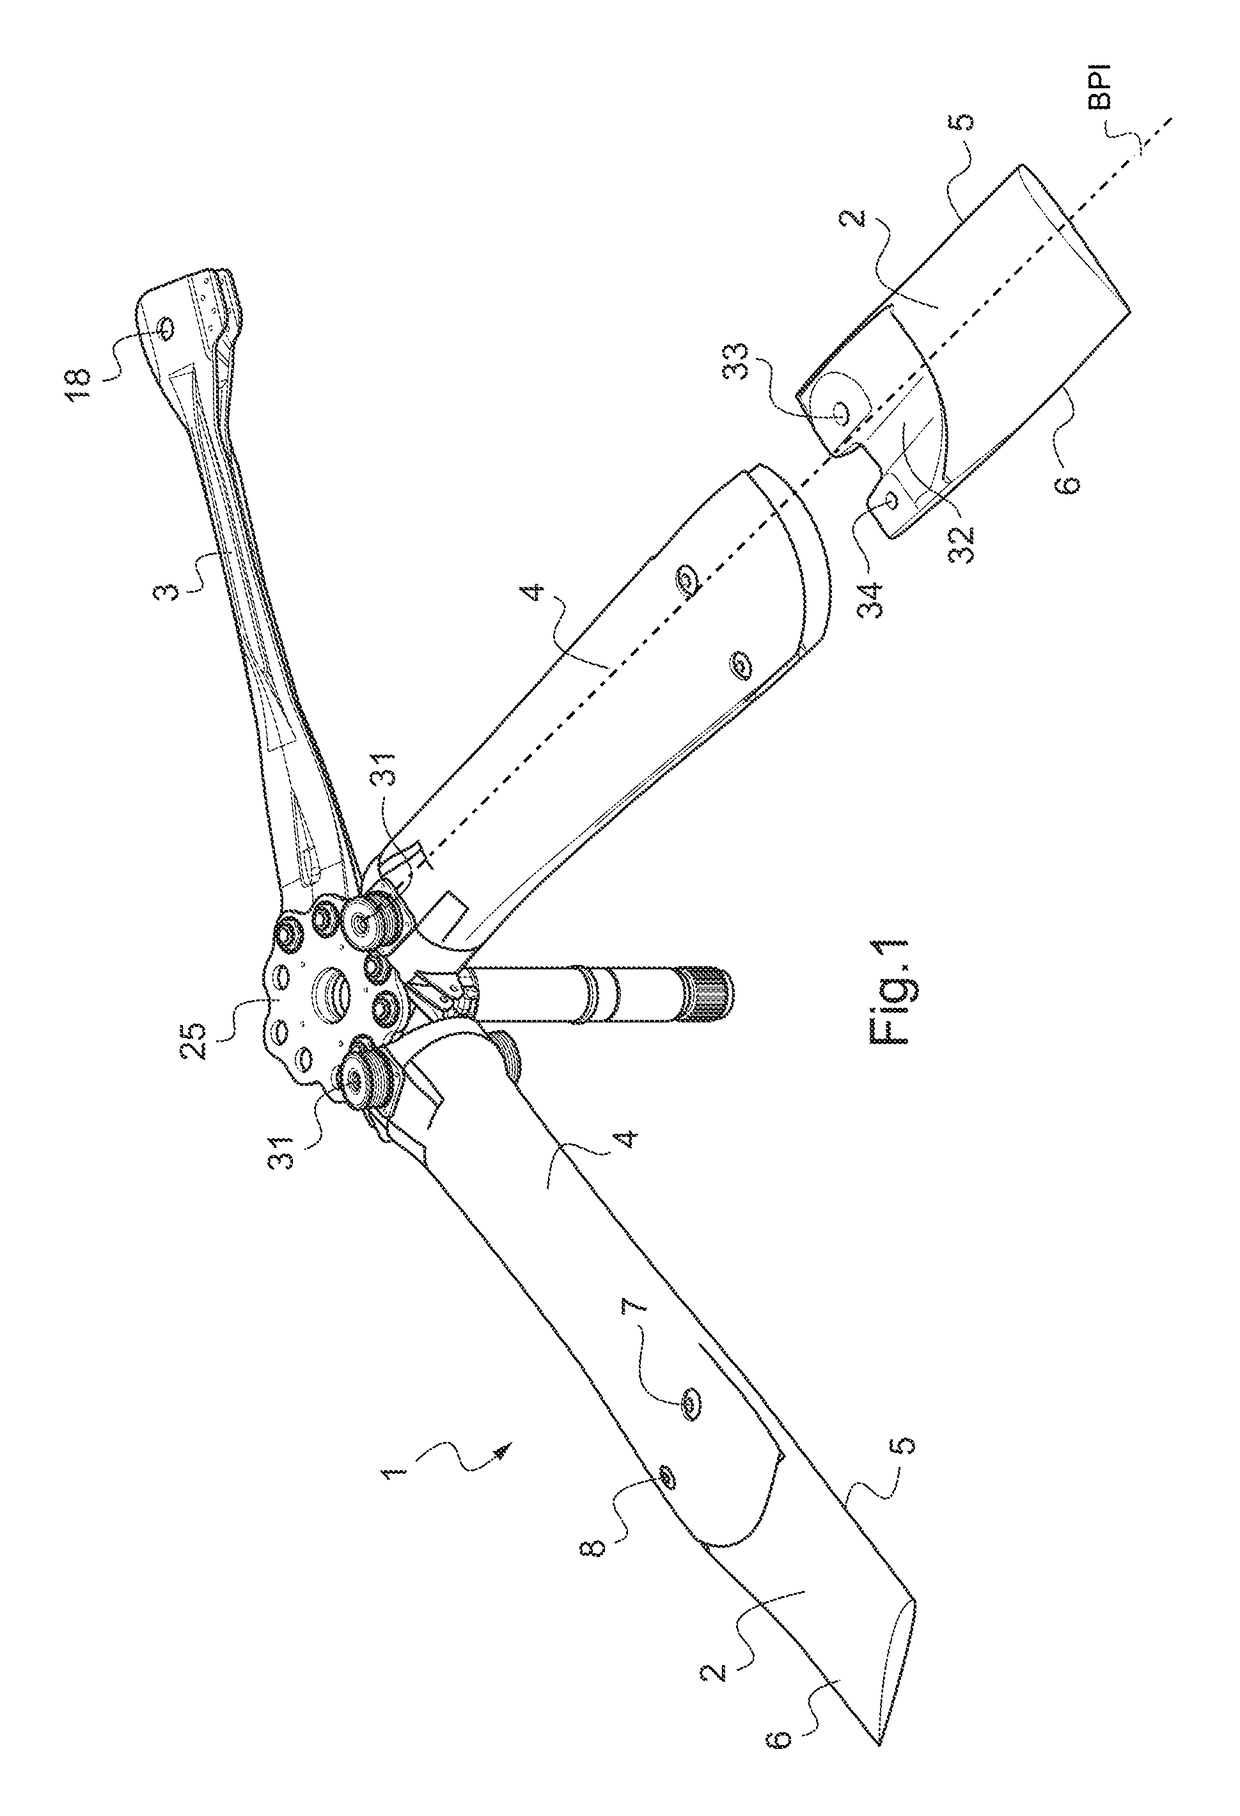 Connection joint for attaching an airfoil blade to a helicopter's bearingless main rotor